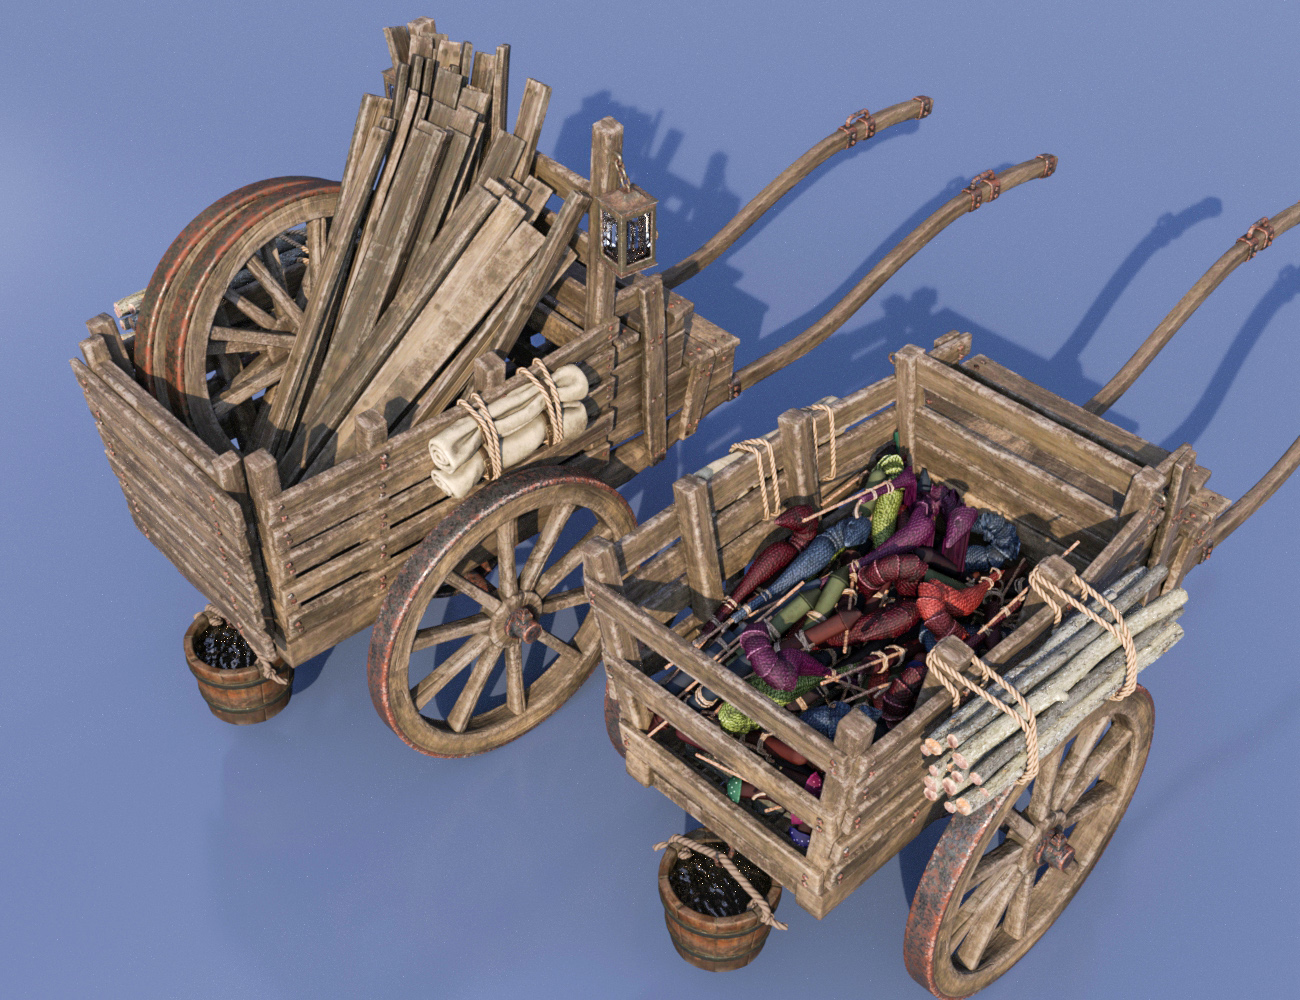 Two Wheeled Cart versions